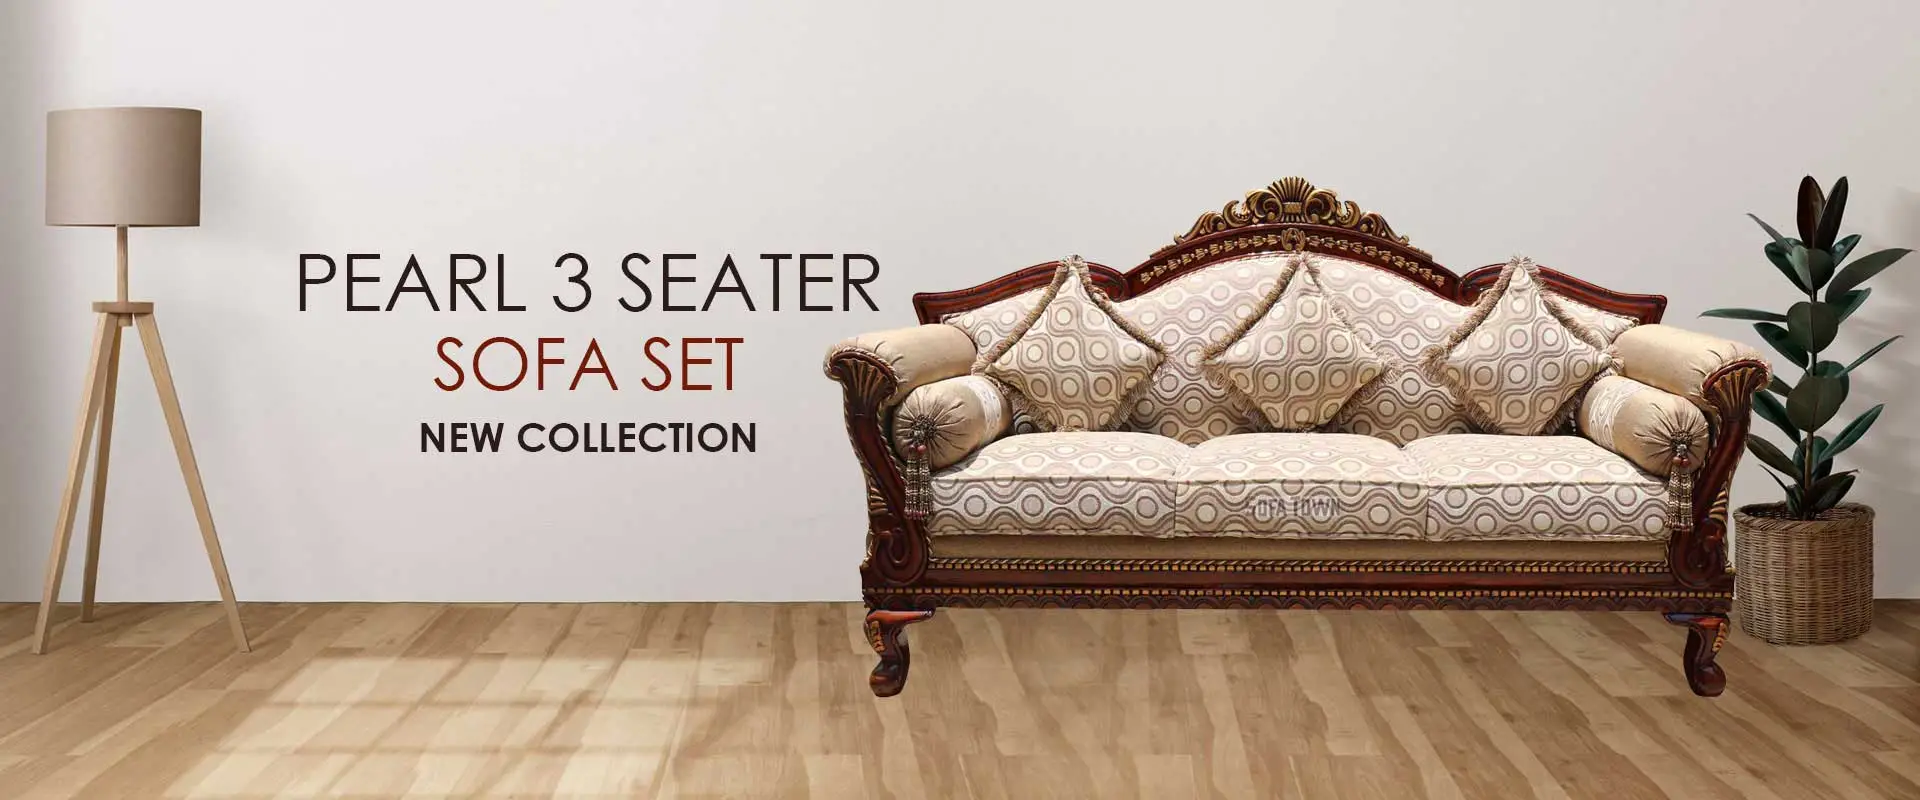 Pearl 3 Seater Sofa Set  Manufacturers in Bhopal